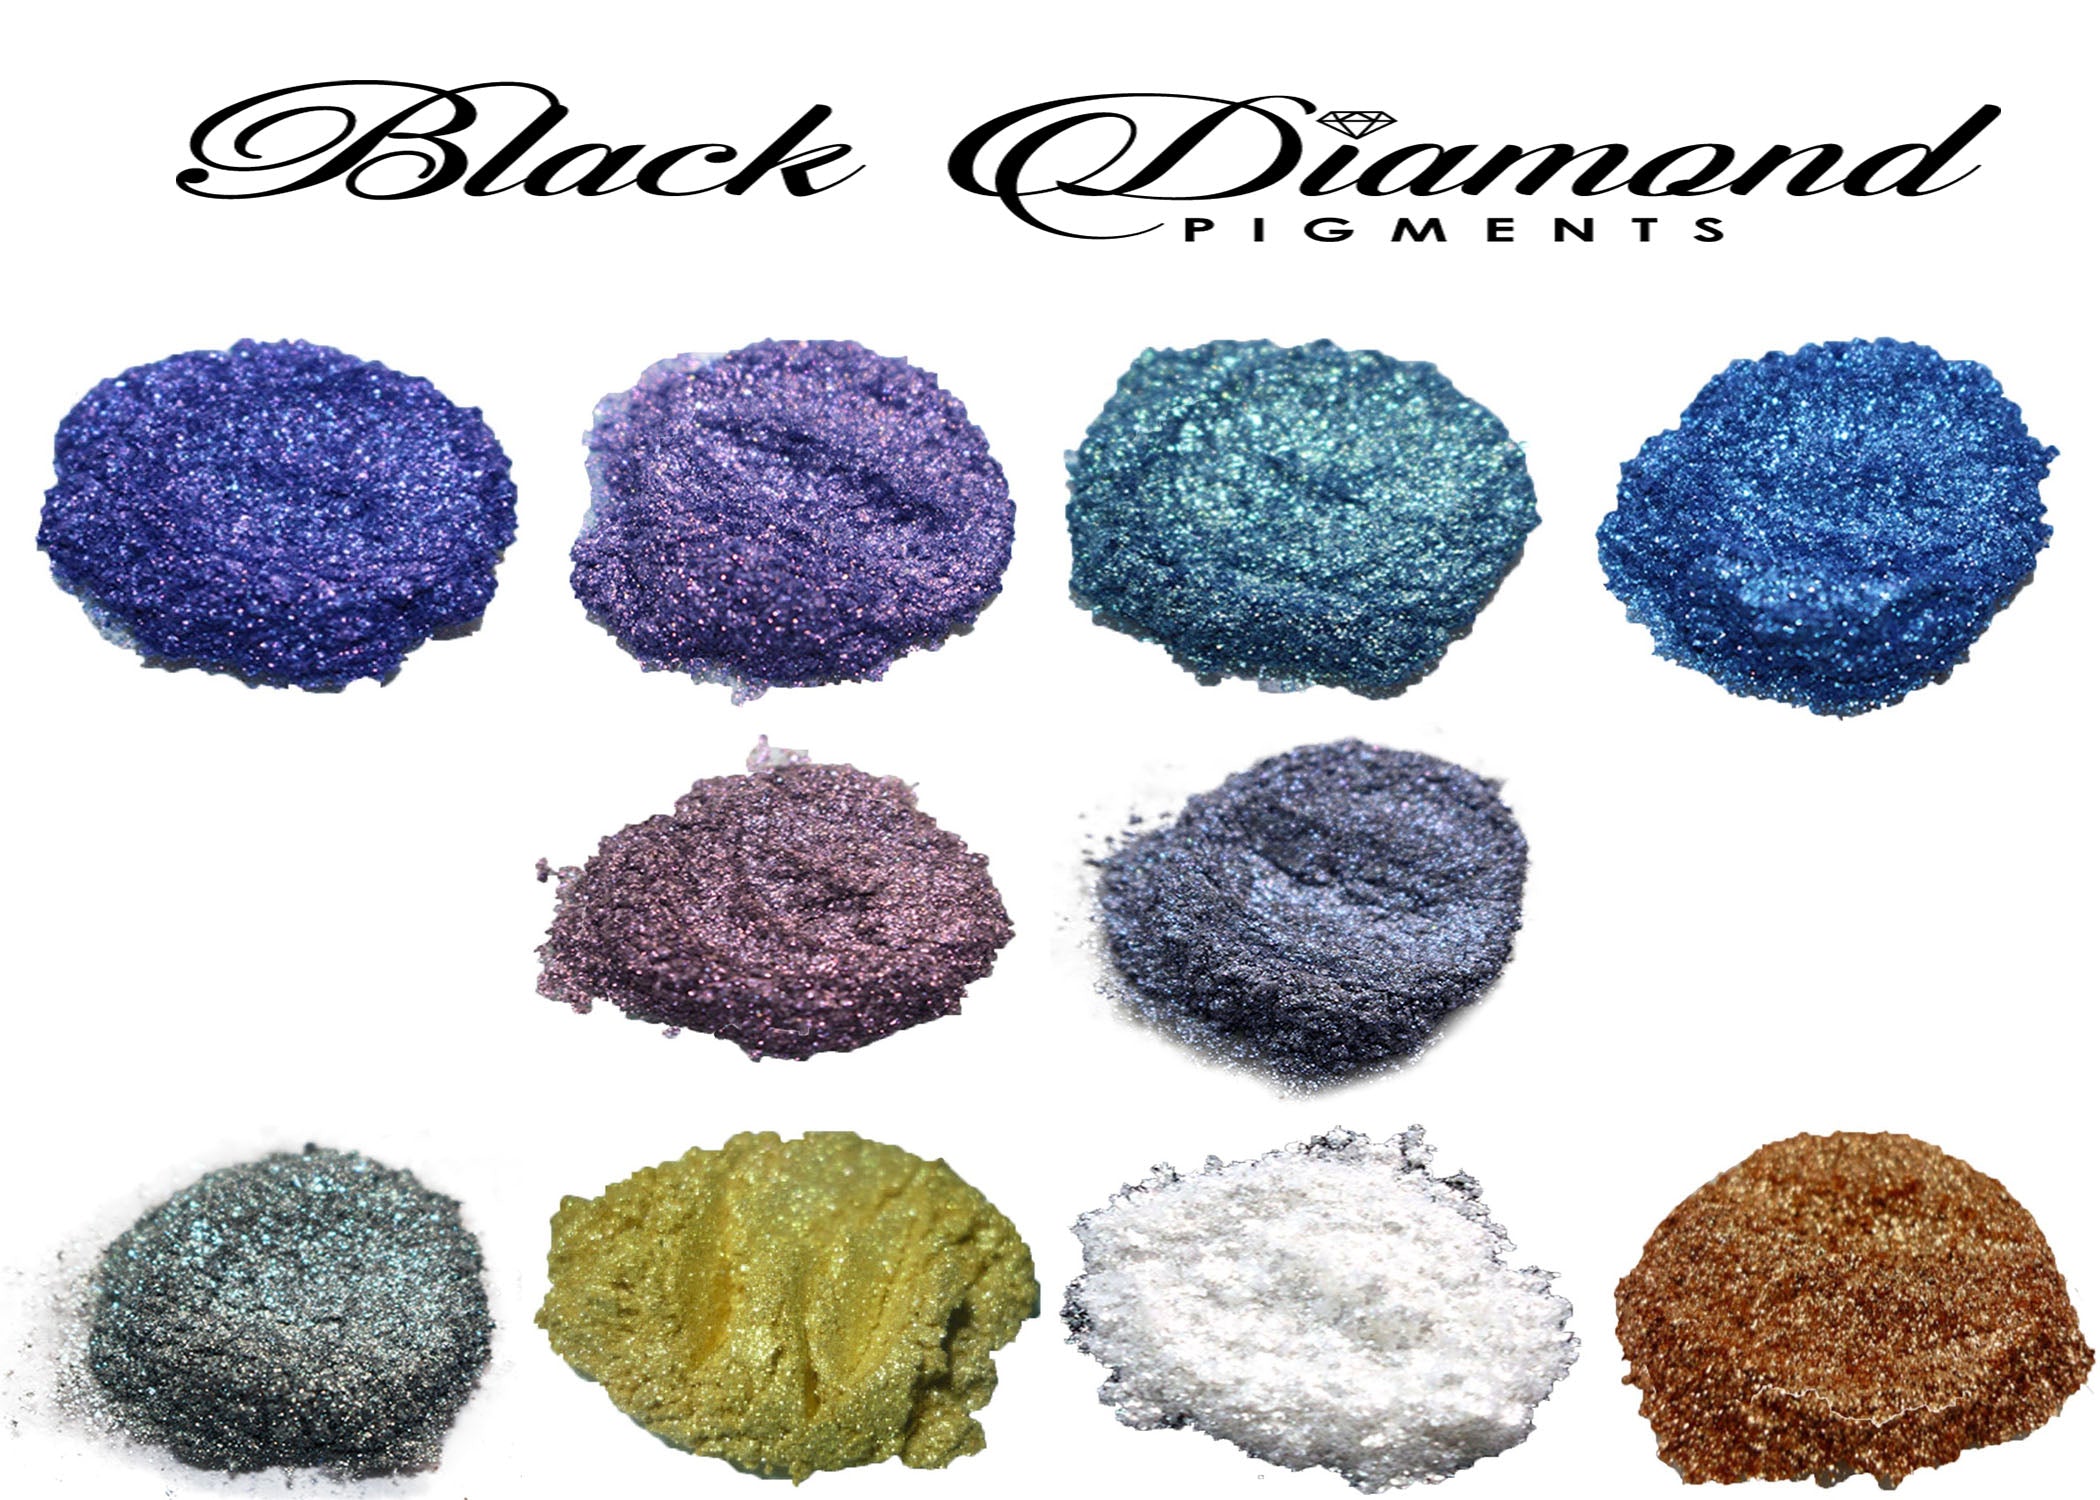 10 Color Pigment Powder Variety Pack Set B (Mica Powder for Epoxy